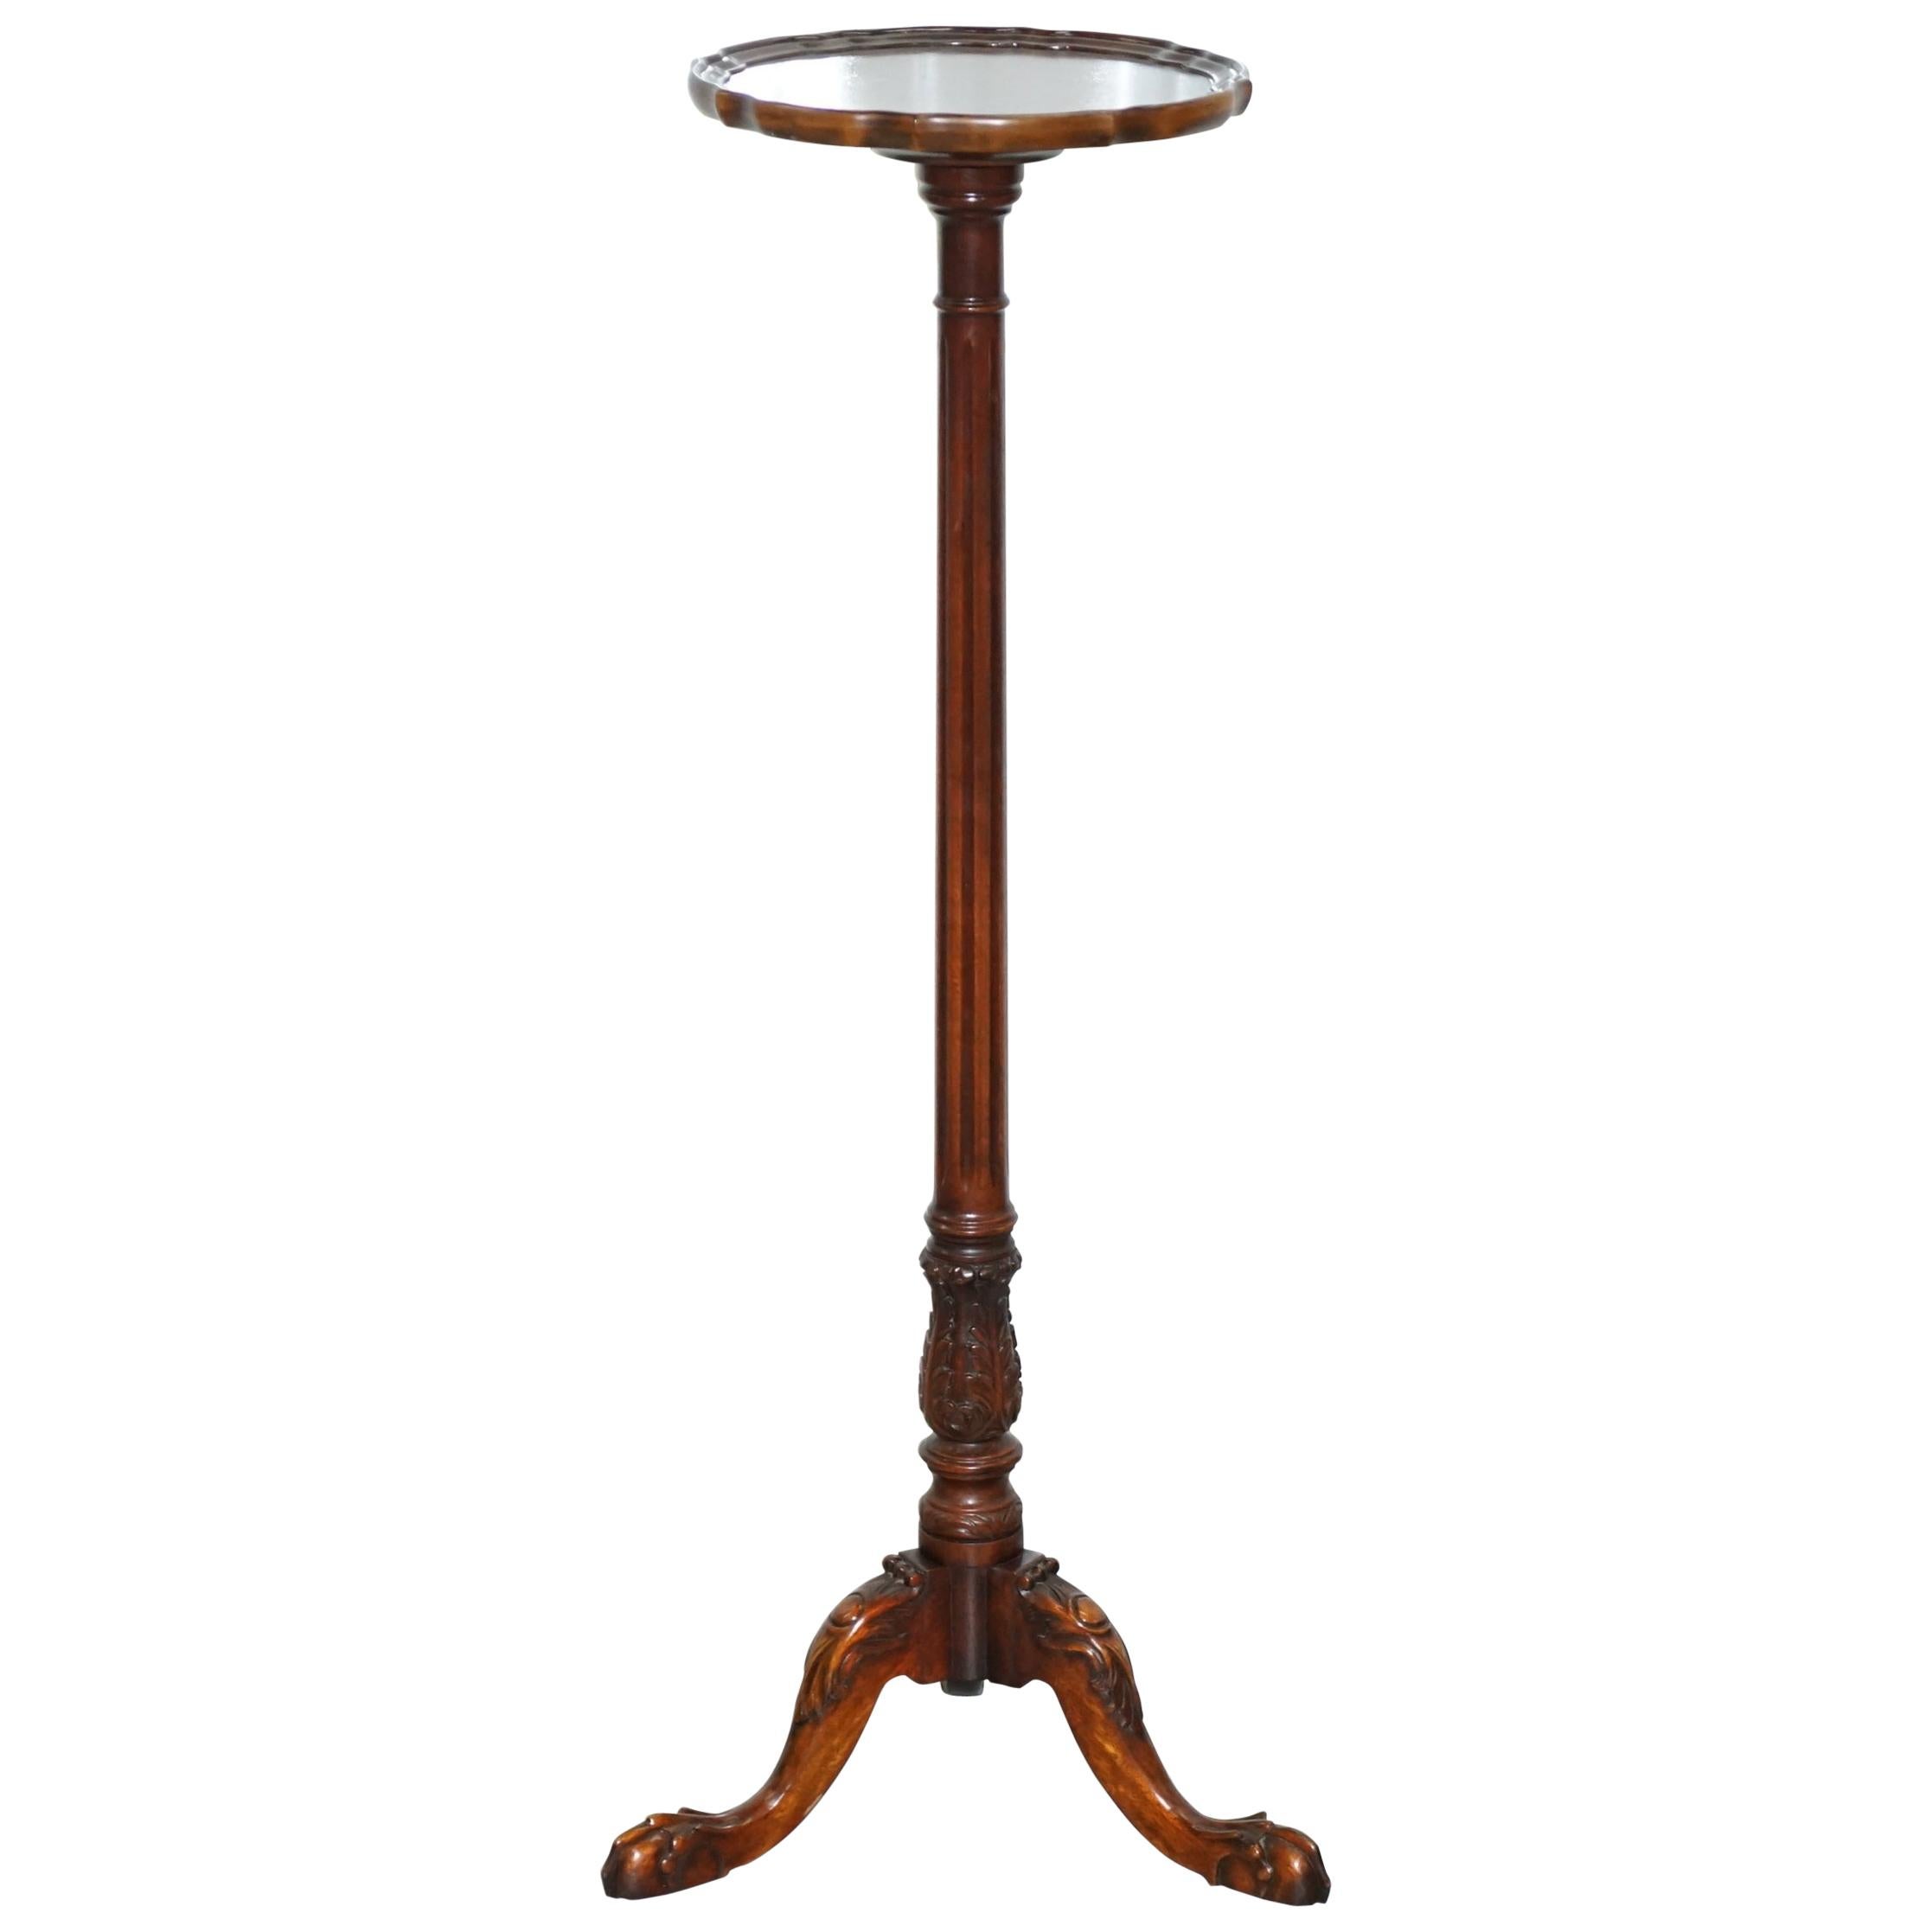 Tall Hand Carved Hardwood Jardiniere Stand, Claw & Ball Feet Scalloped Edge Top